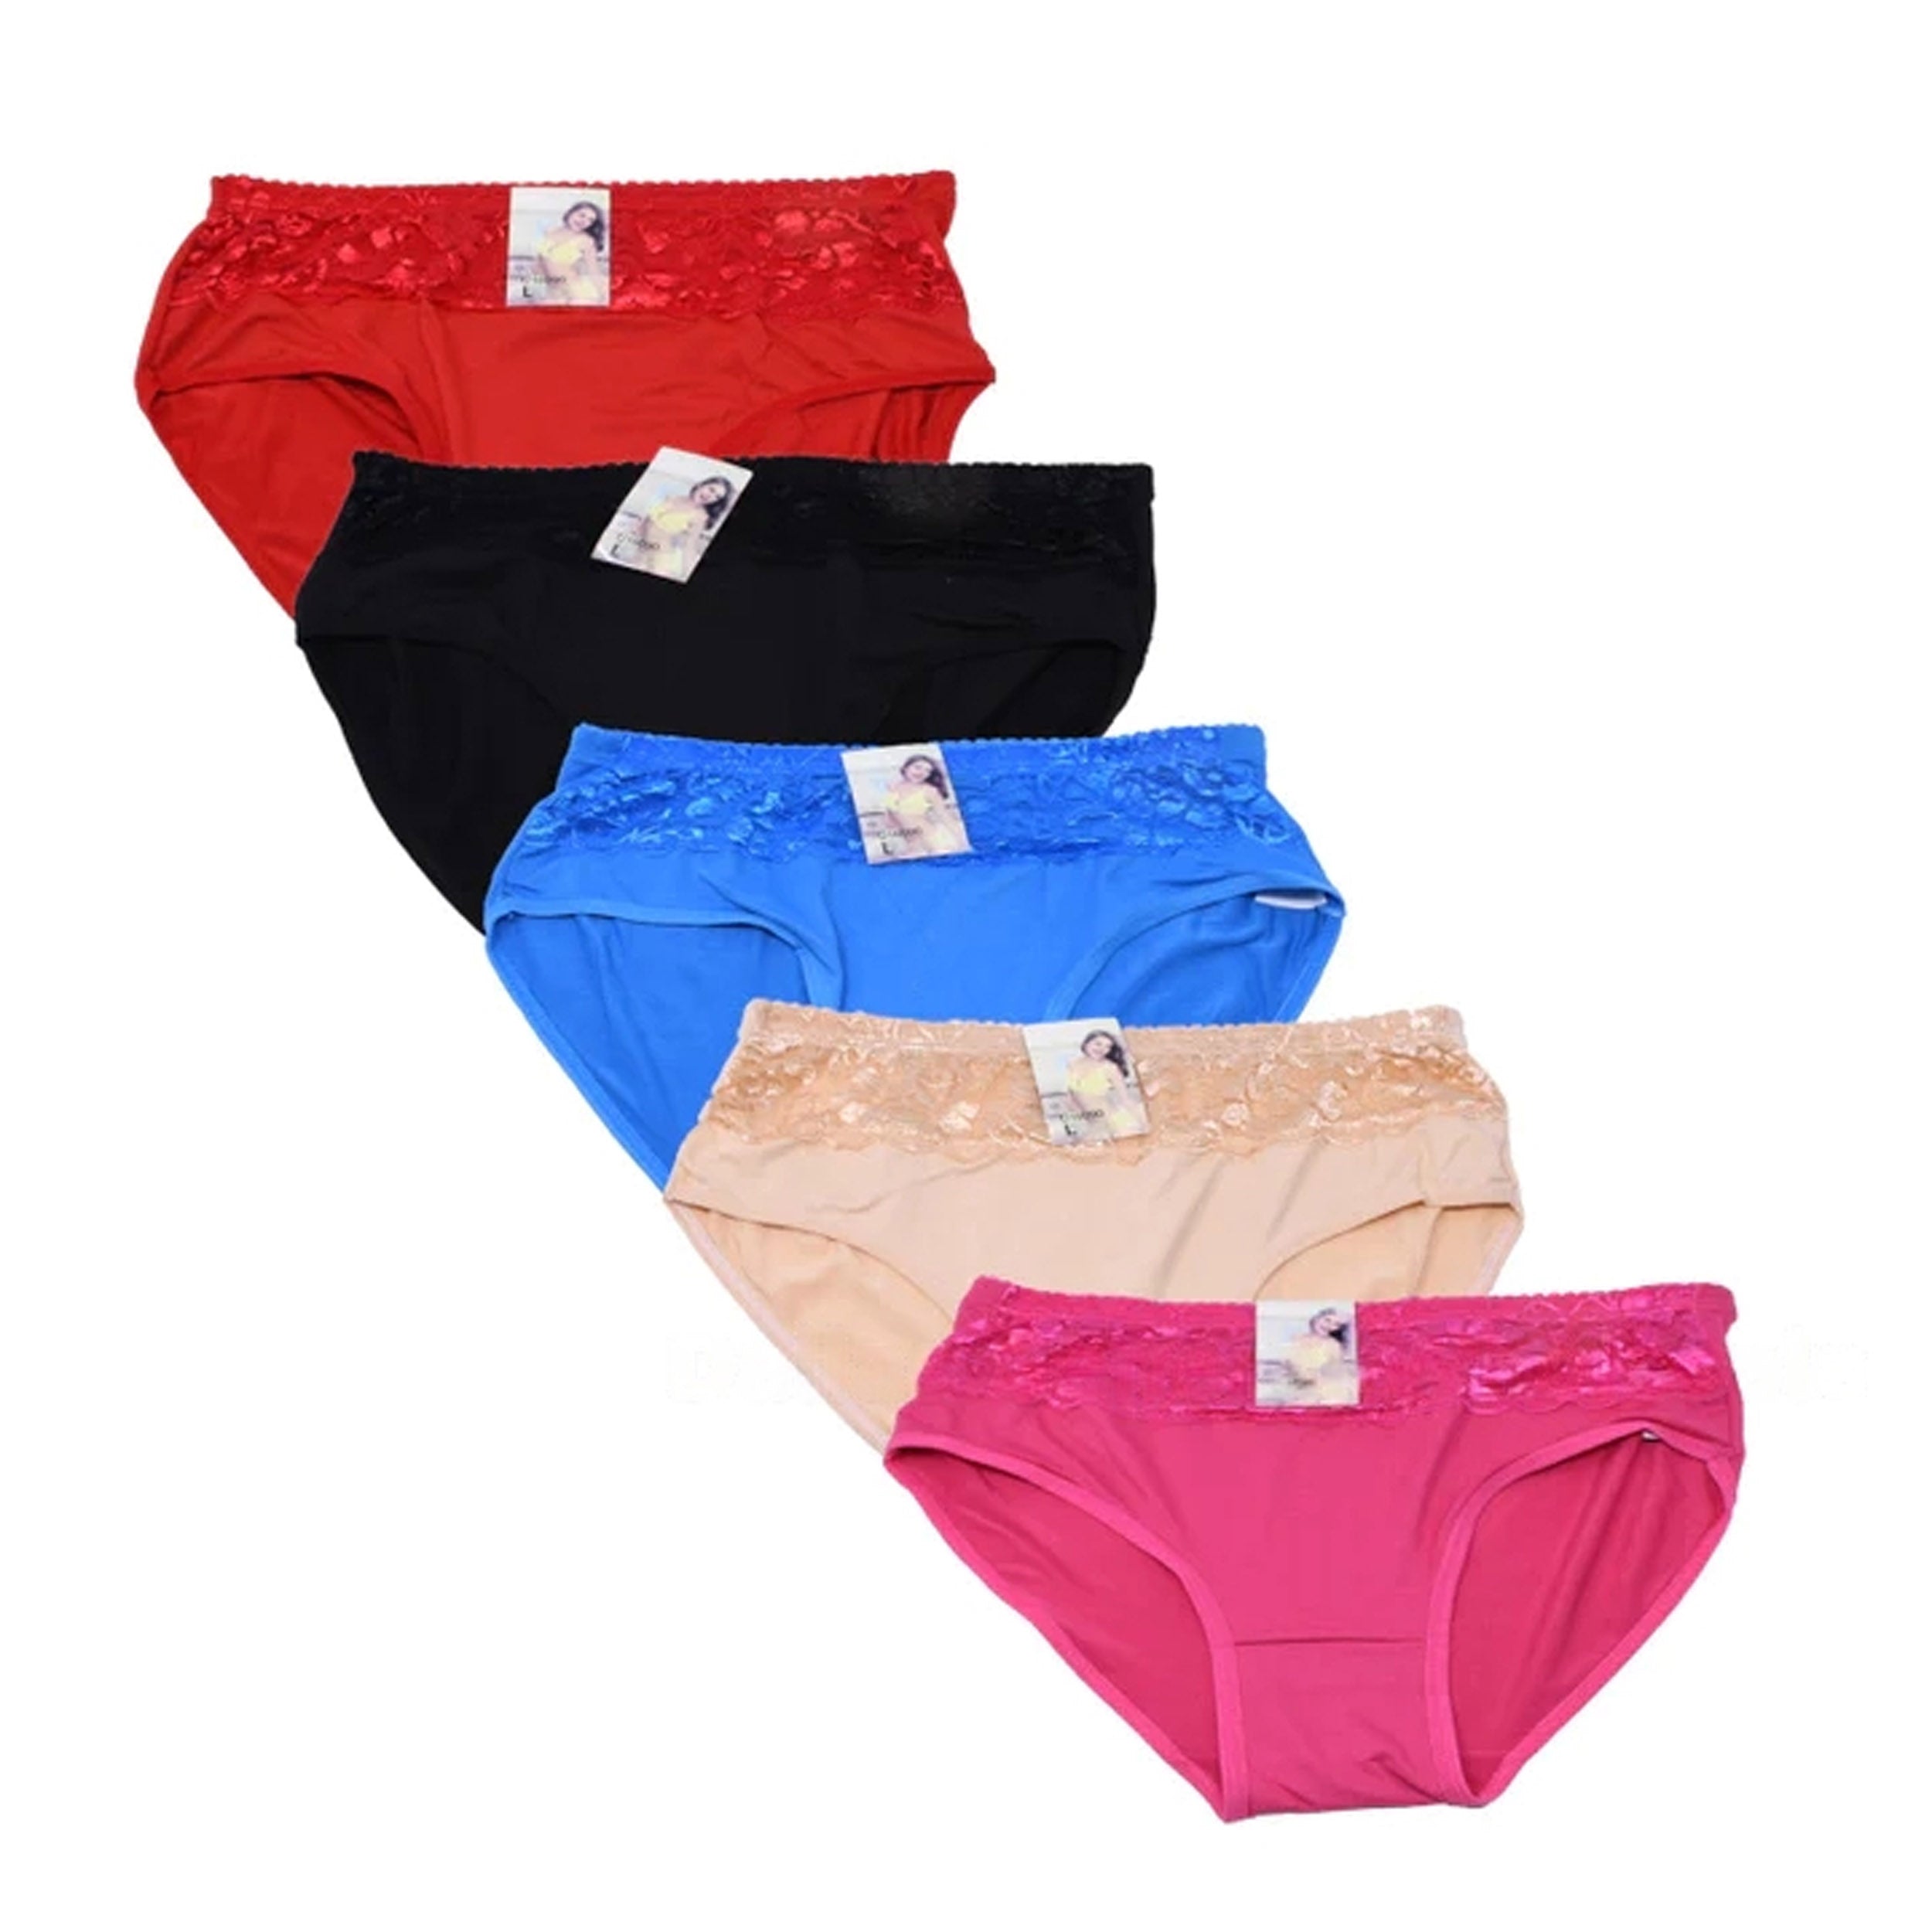 Wholesale Underwear for Fat Women Cotton, Lace, Seamless, Shaping 